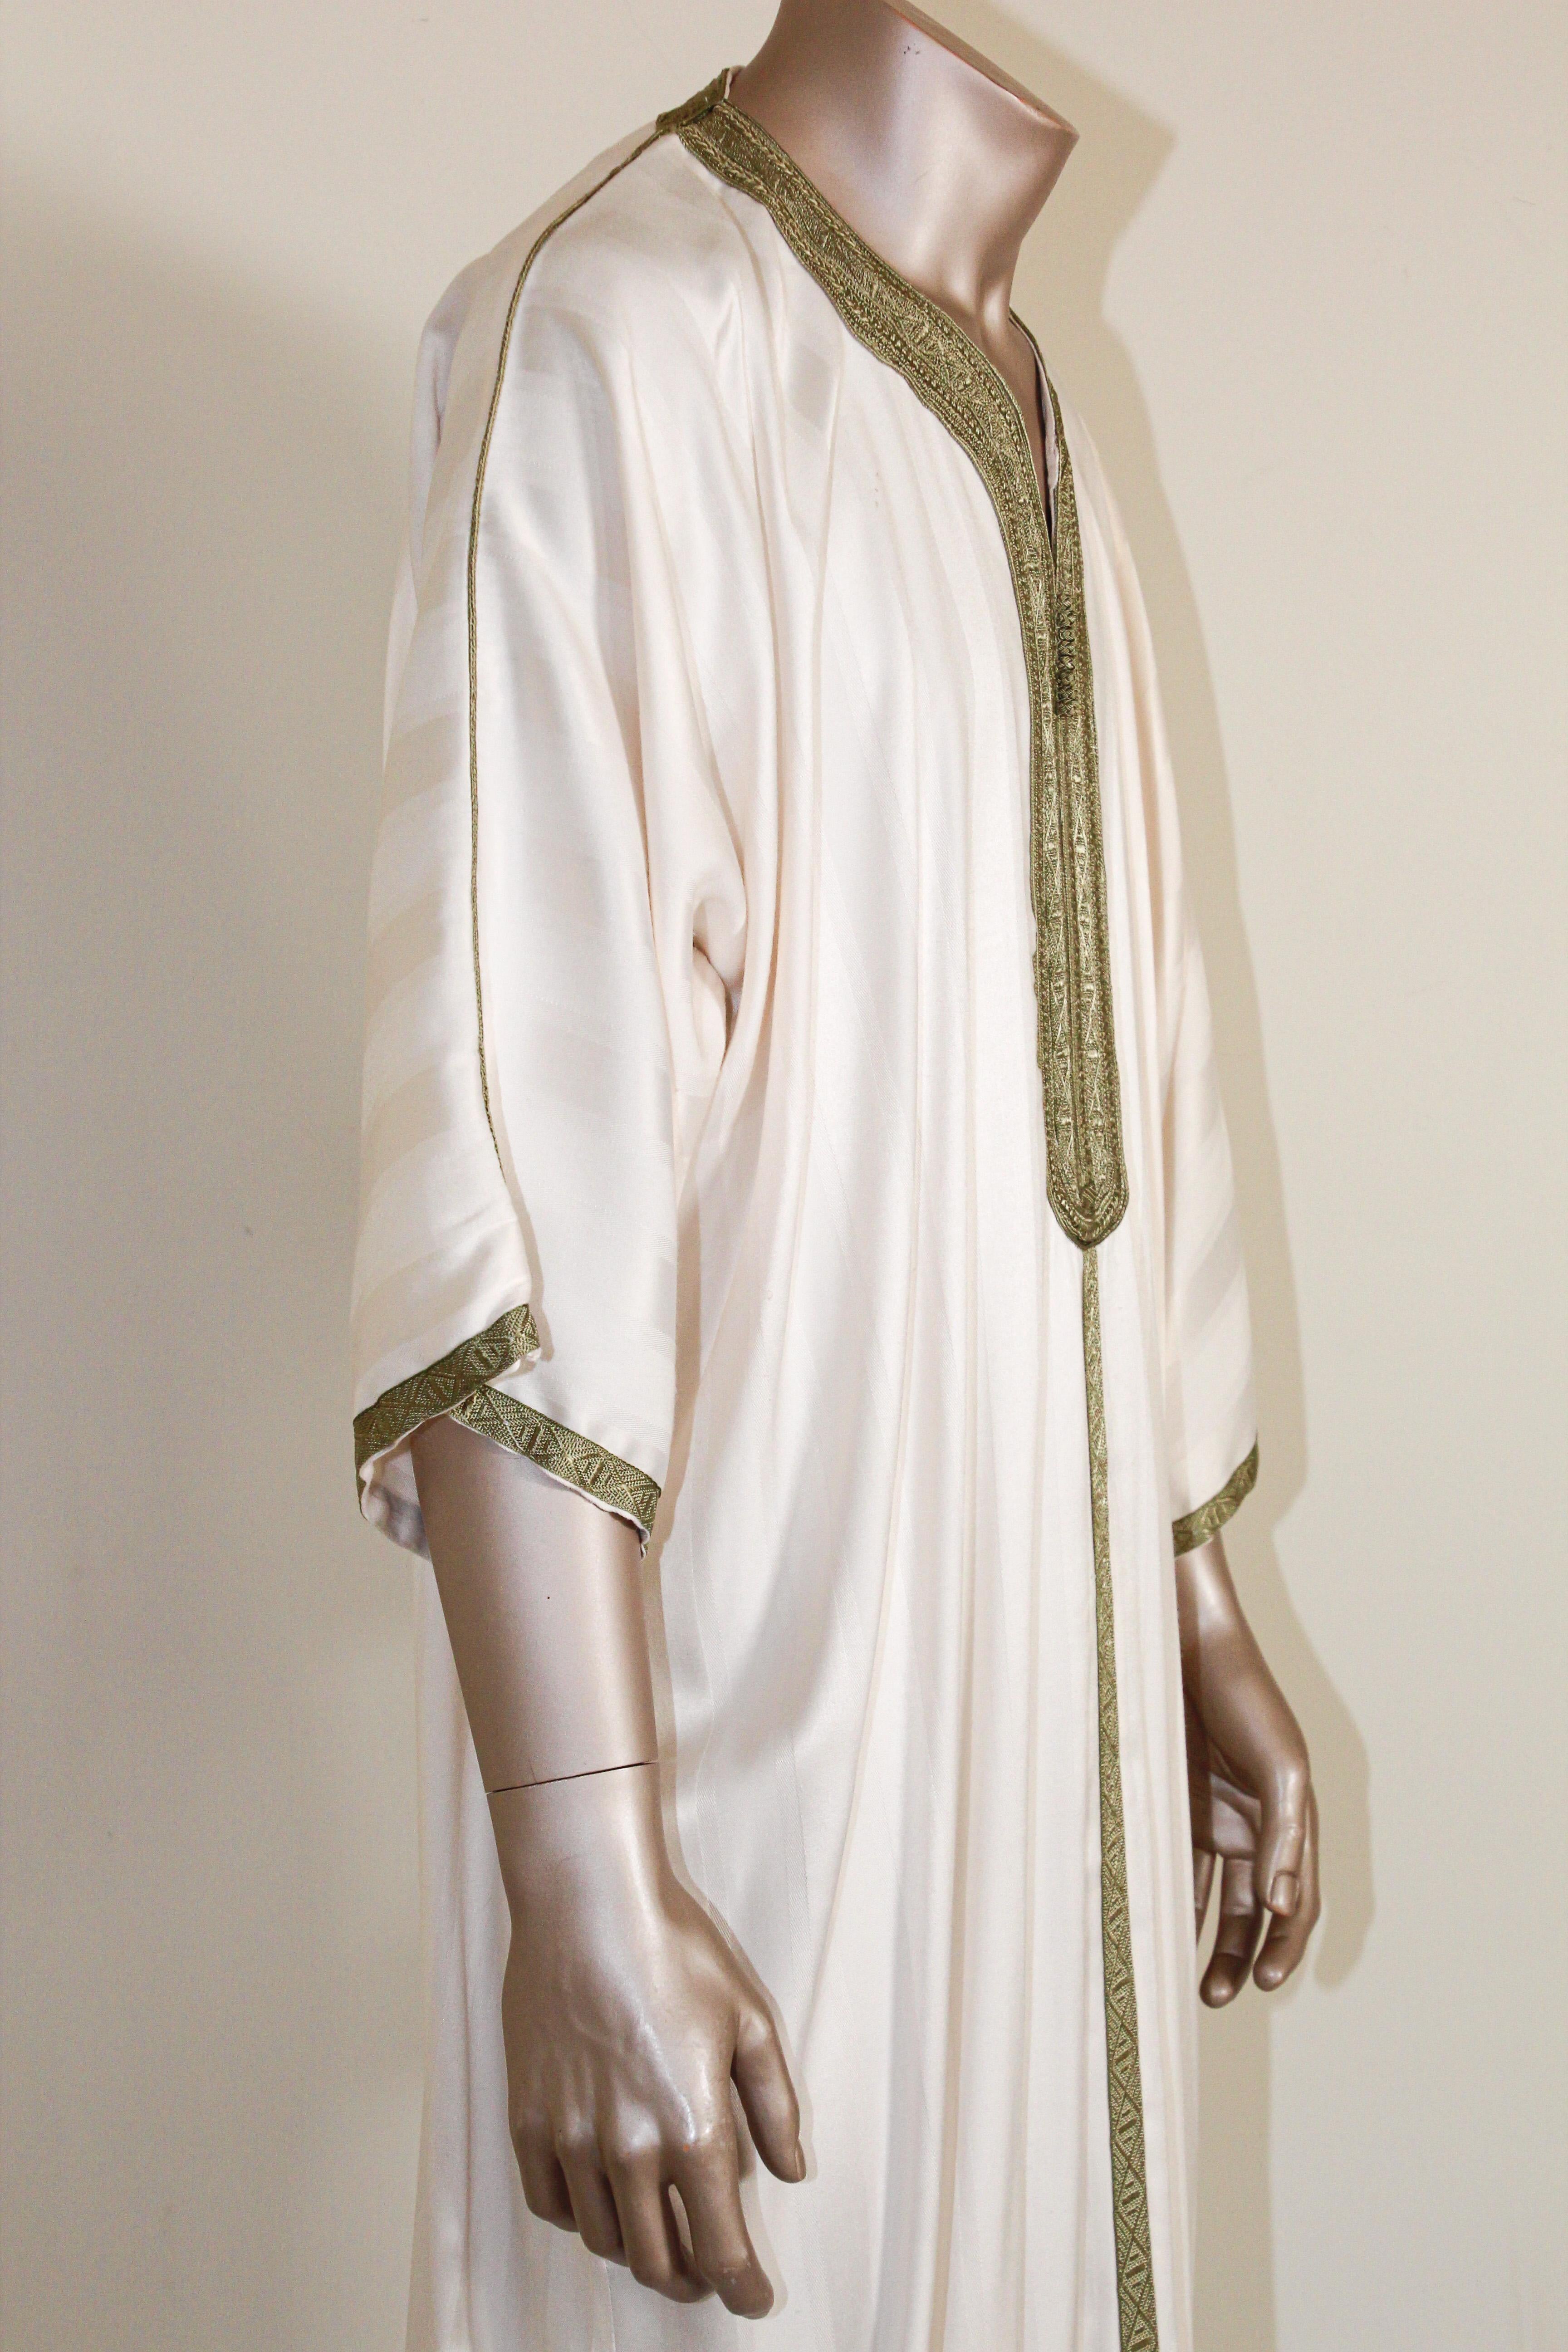 Moroccan Vintage Gentleman Caftan White with Green Trim For Sale 2